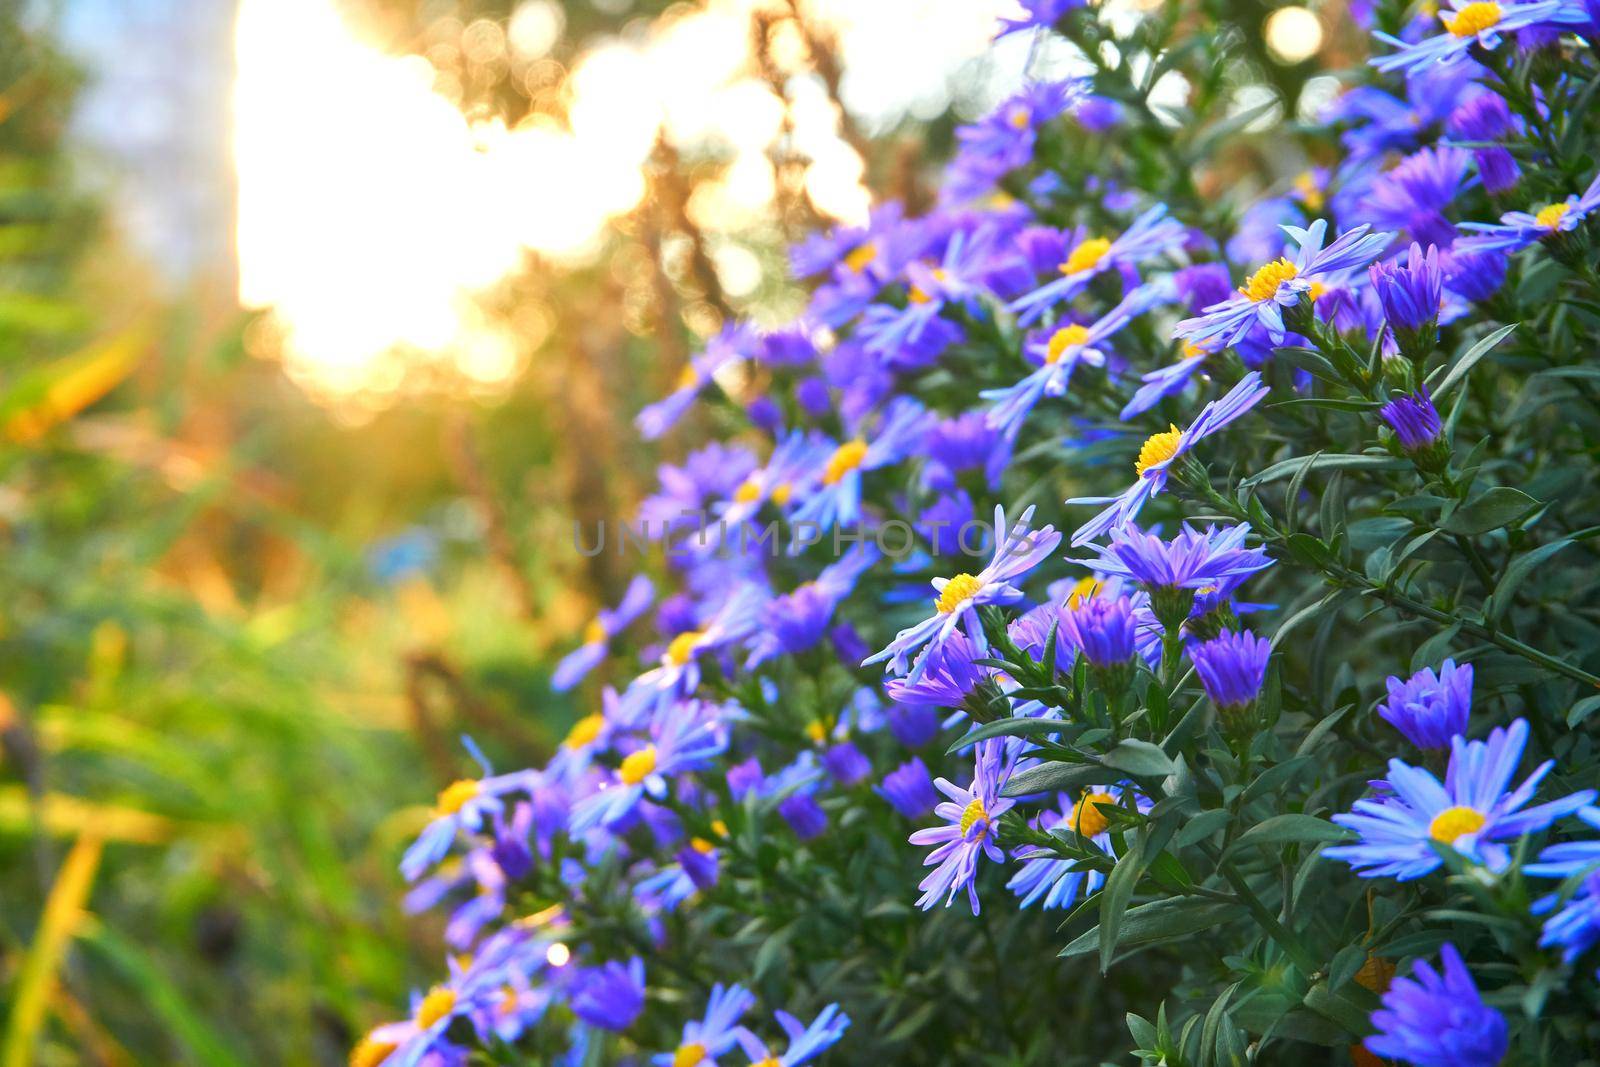 Large bush of fragrant purple blue asters October skies and bright sun by jovani68